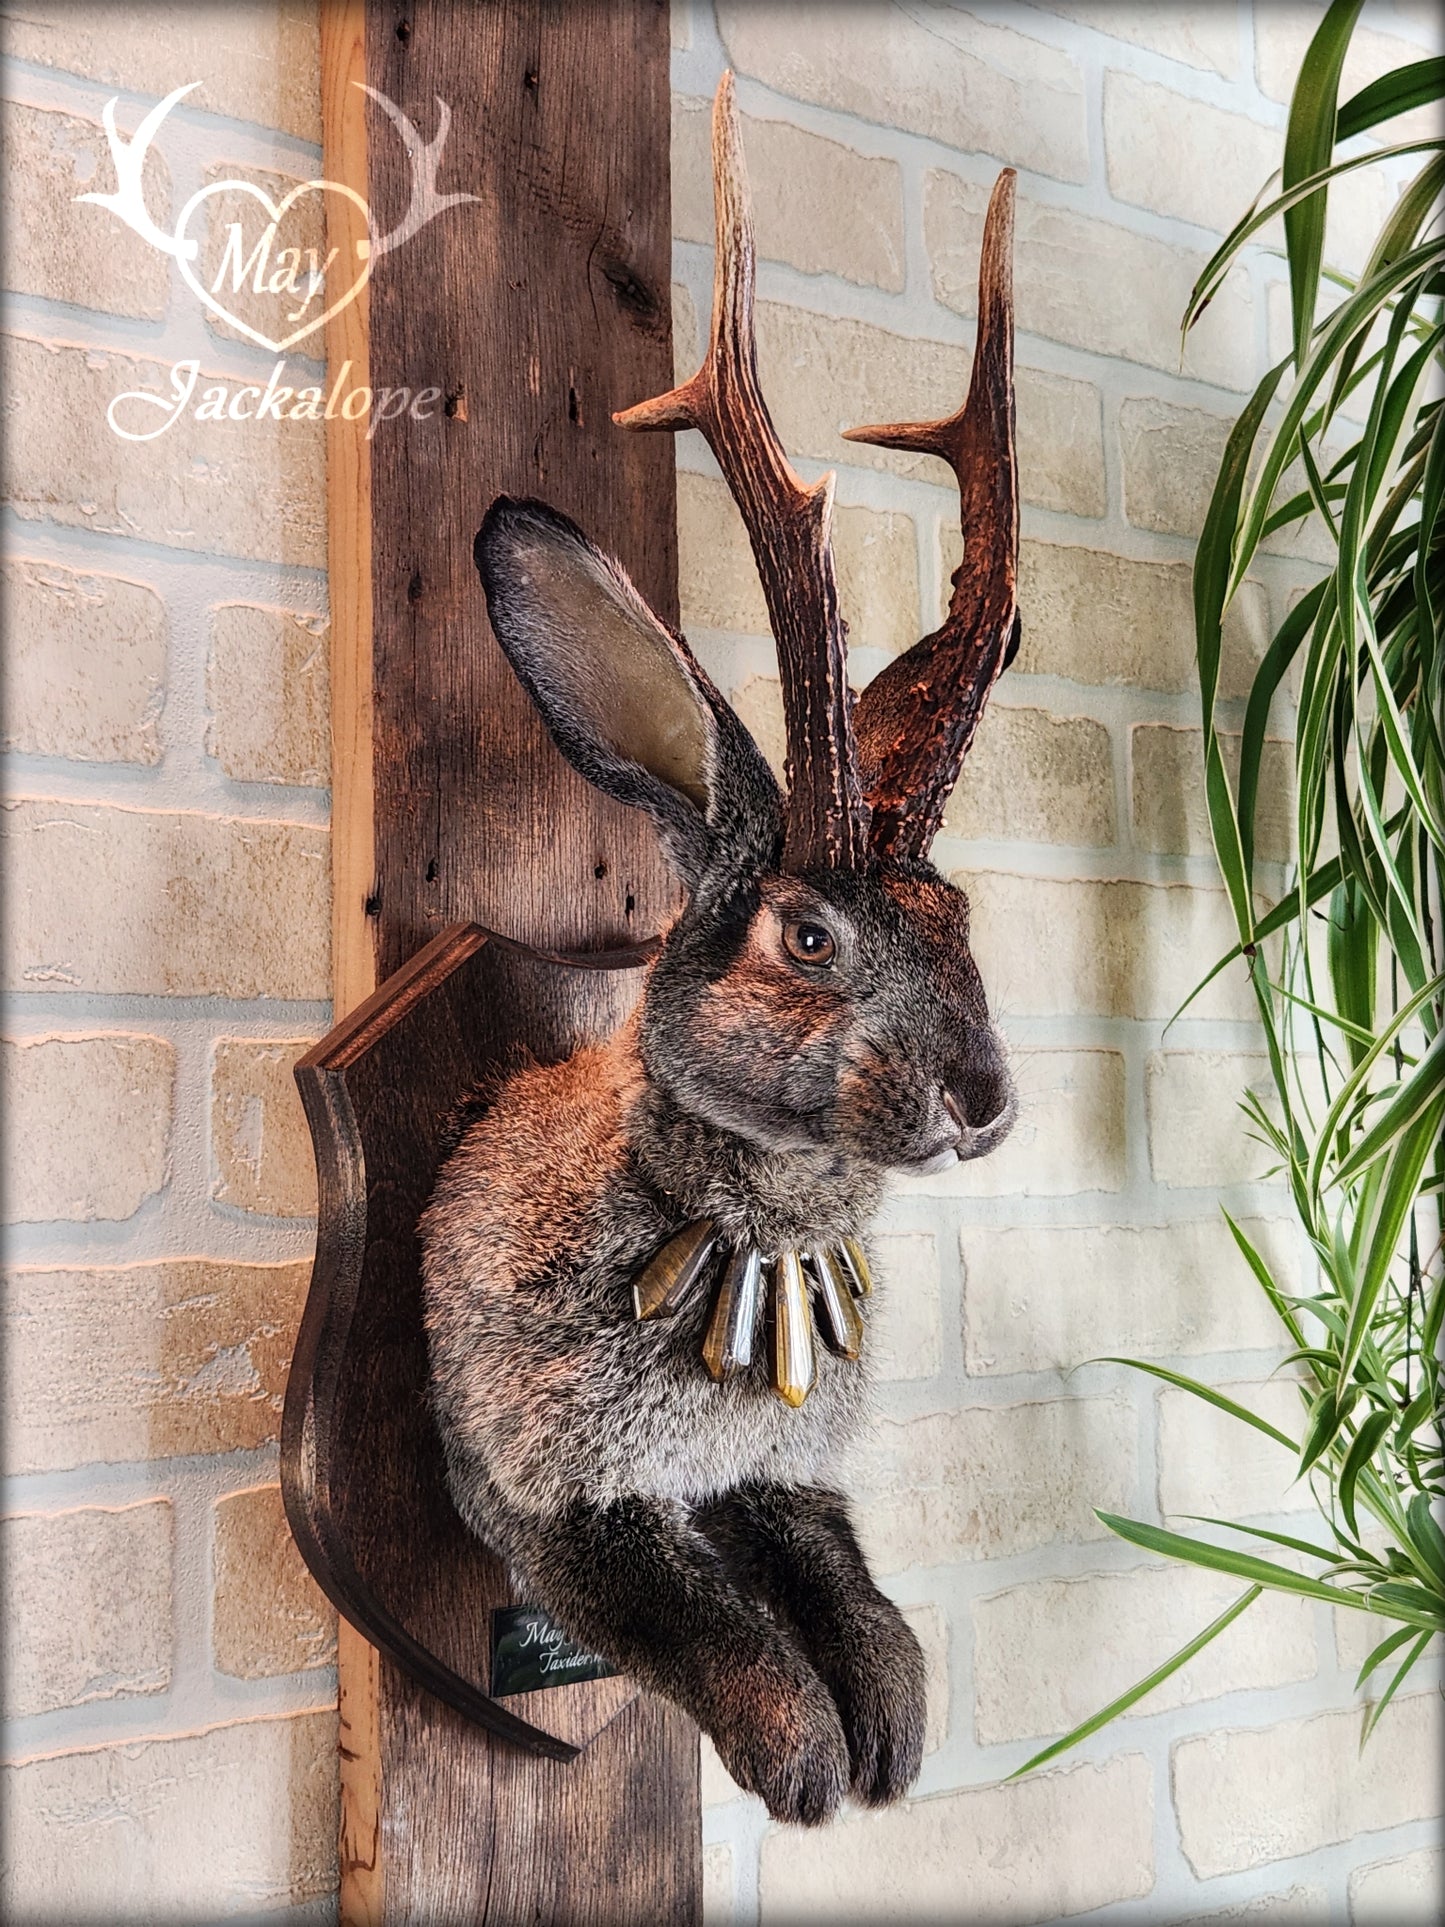 Big dark brown Jackalope taxidermy with hazel eyes, real antlers and a necklace